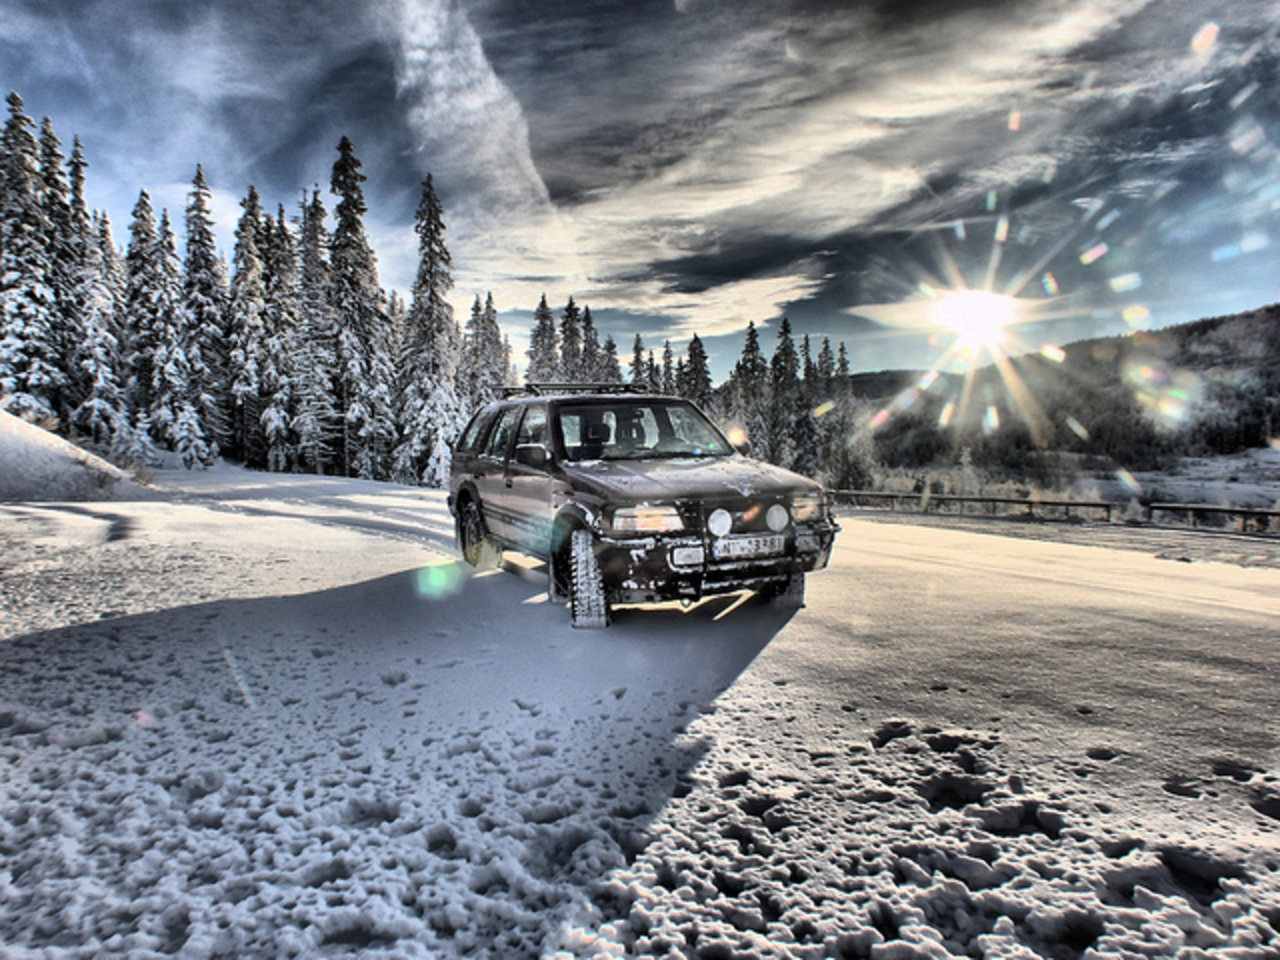 Opel Frontera in the arctic | Flickr - Photo Sharing!